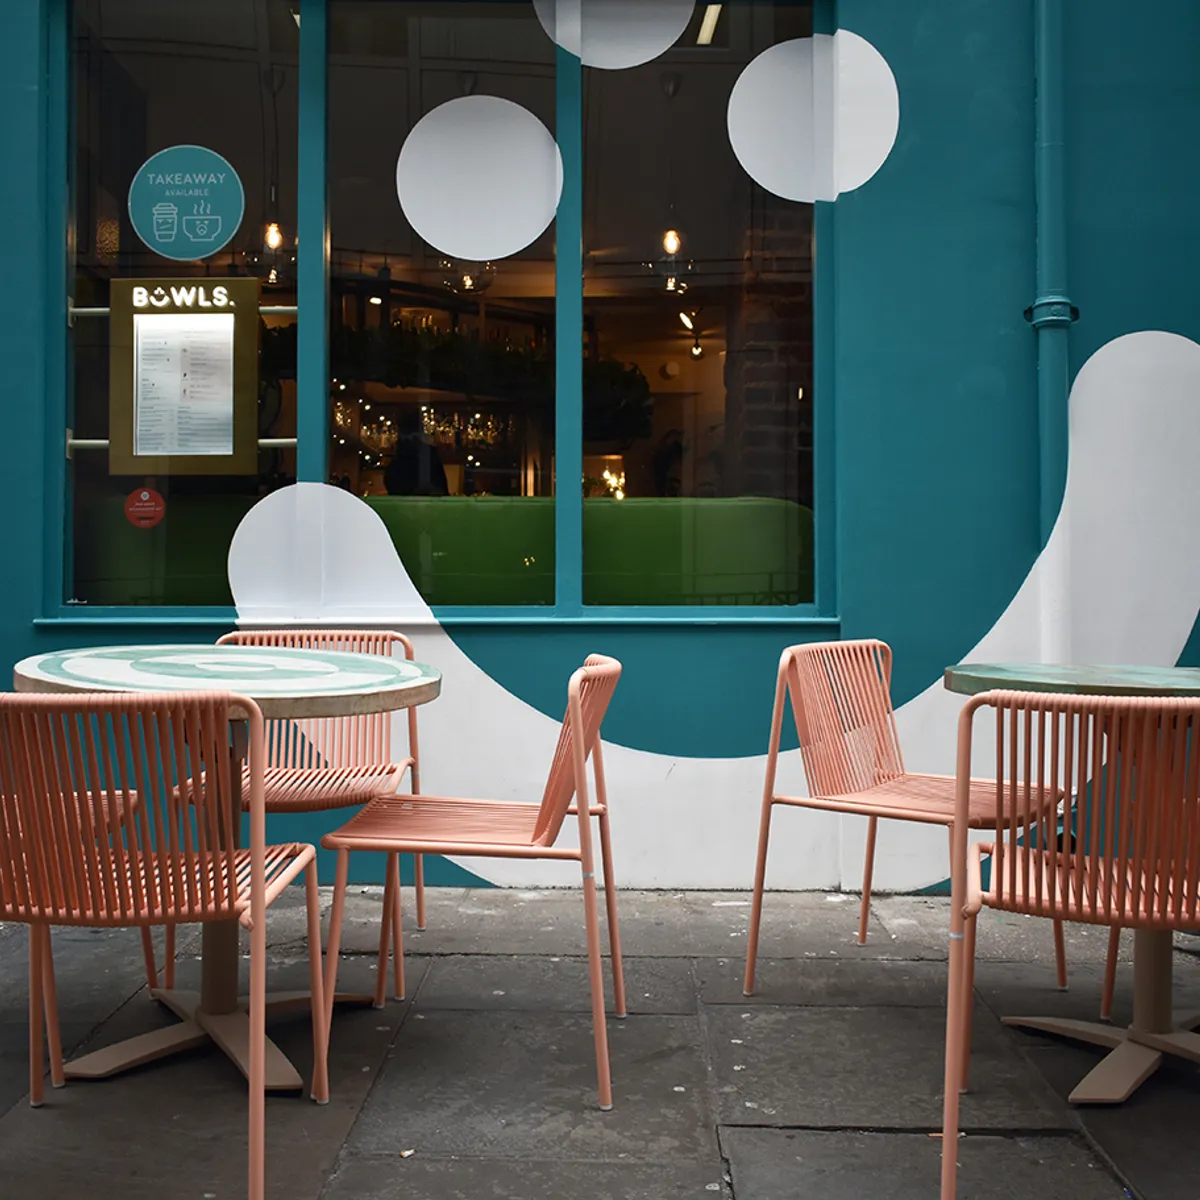 Bowls soho restaurant with outdoor furniture and recycled table tops by insideoutcontracts08